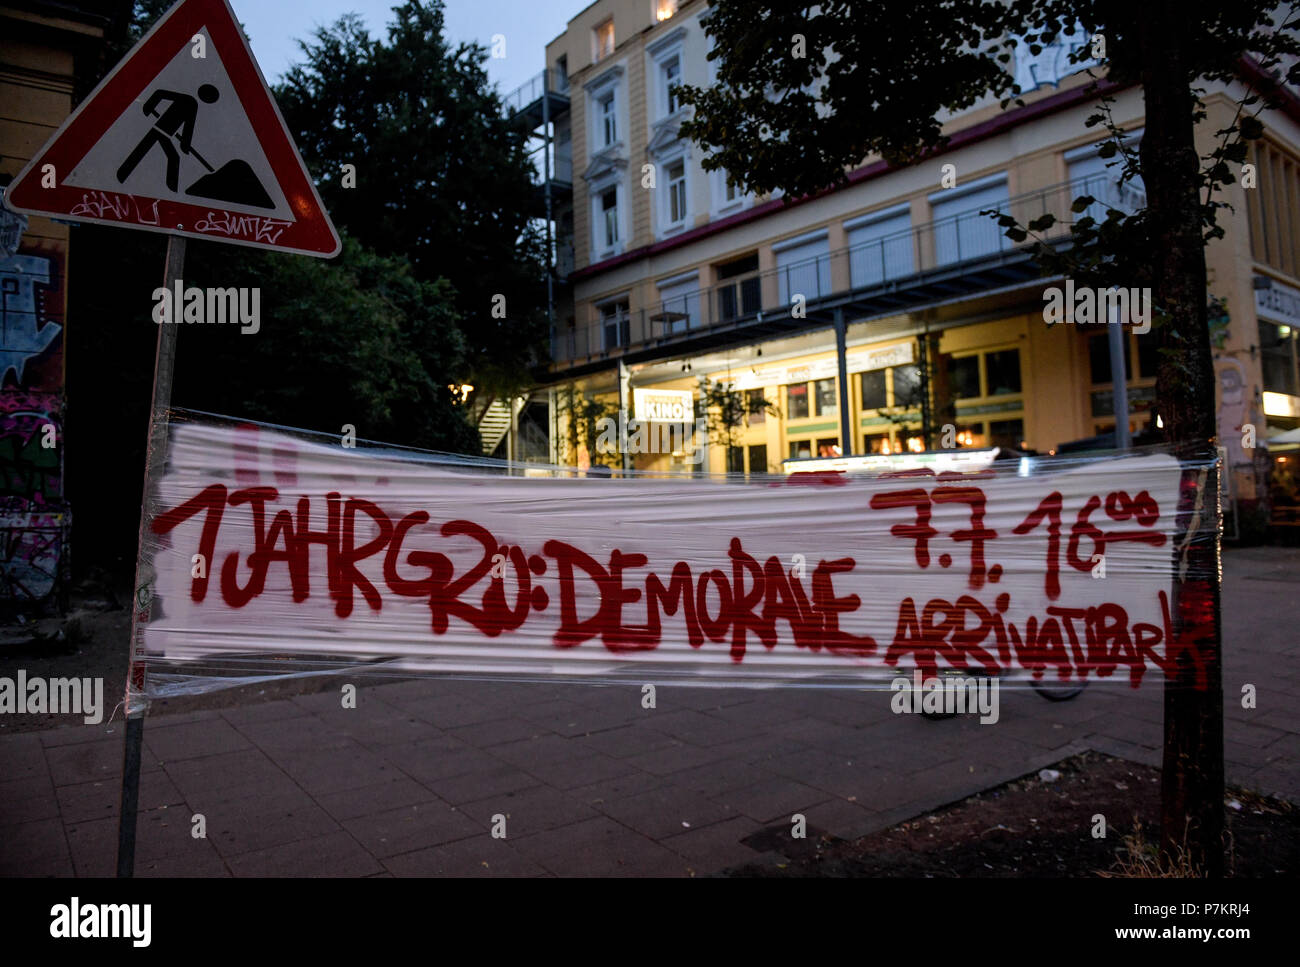 Hamburg, Germany. 07th July, 2018. Protesters take to the streets one year after the G20 summit, carrying a sign reading '1 Jahr G20 Demorave' (lit. '1 Year G20 Demo Rave'). The demonstration runs under the slogan 'Solidarity without borders instead of G20'. Credit: Markus Scholz, Axel Heimken/dpa/Alamy Live News Stock Photo